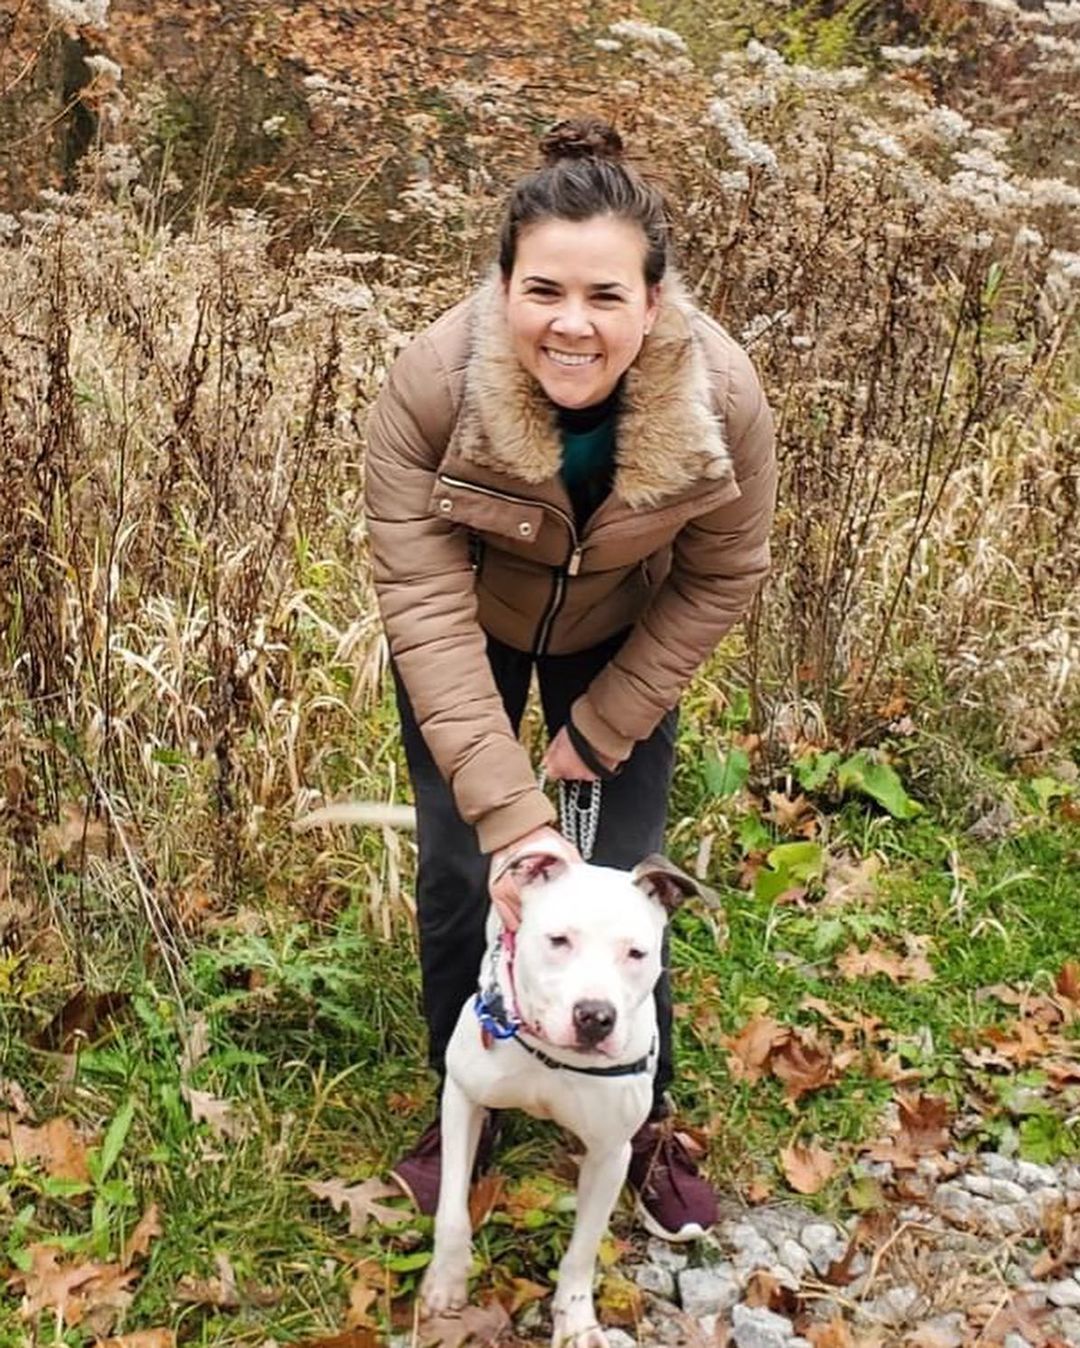 Ever wonder what it would be like to volunteer at CCAS? It’s pretty pawesome!! Yesterday we took 17 dogs out of the shelter for a fall hike, followed by burgers for the pups! Check out our website for more info on how you can join our pack! 🐾 

<a target='_blank' href='https://www.instagram.com/explore/tags/CCAS/'>#CCAS</a> <a target='_blank' href='https://www.instagram.com/explore/tags/CuyahogaShelter/'>#CuyahogaShelter</a> <a target='_blank' href='https://www.instagram.com/explore/tags/CuyahogaDogs/'>#CuyahogaDogs</a> <a target='_blank' href='https://www.instagram.com/explore/tags/shelterdogs/'>#shelterdogs</a> <a target='_blank' href='https://www.instagram.com/explore/tags/rescuedogs/'>#rescuedogs</a> <a target='_blank' href='https://www.instagram.com/explore/tags/shelterdogsofinstagram/'>#shelterdogsofinstagram</a> <a target='_blank' href='https://www.instagram.com/explore/tags/chewsadoption/'>#chewsadoption</a> <a target='_blank' href='https://www.instagram.com/explore/tags/adoptdontshop/'>#adoptdontshop</a> <a target='_blank' href='https://www.instagram.com/explore/tags/rescueismyfavoritebreed/'>#rescueismyfavoritebreed</a> <a target='_blank' href='https://www.instagram.com/explore/tags/adoptme/'>#adoptme</a> <a target='_blank' href='https://www.instagram.com/explore/tags/ohioshelter/'>#ohioshelter</a> <a target='_blank' href='https://www.instagram.com/explore/tags/OhioDogs/'>#OhioDogs</a> <a target='_blank' href='https://www.instagram.com/explore/tags/shelterpups/'>#shelterpups</a> <a target='_blank' href='https://www.instagram.com/explore/tags/volunteer/'>#volunteer</a> <a target='_blank' href='https://www.instagram.com/explore/tags/volunteering/'>#volunteering</a> <a target='_blank' href='https://www.instagram.com/explore/tags/giveback/'>#giveback</a>